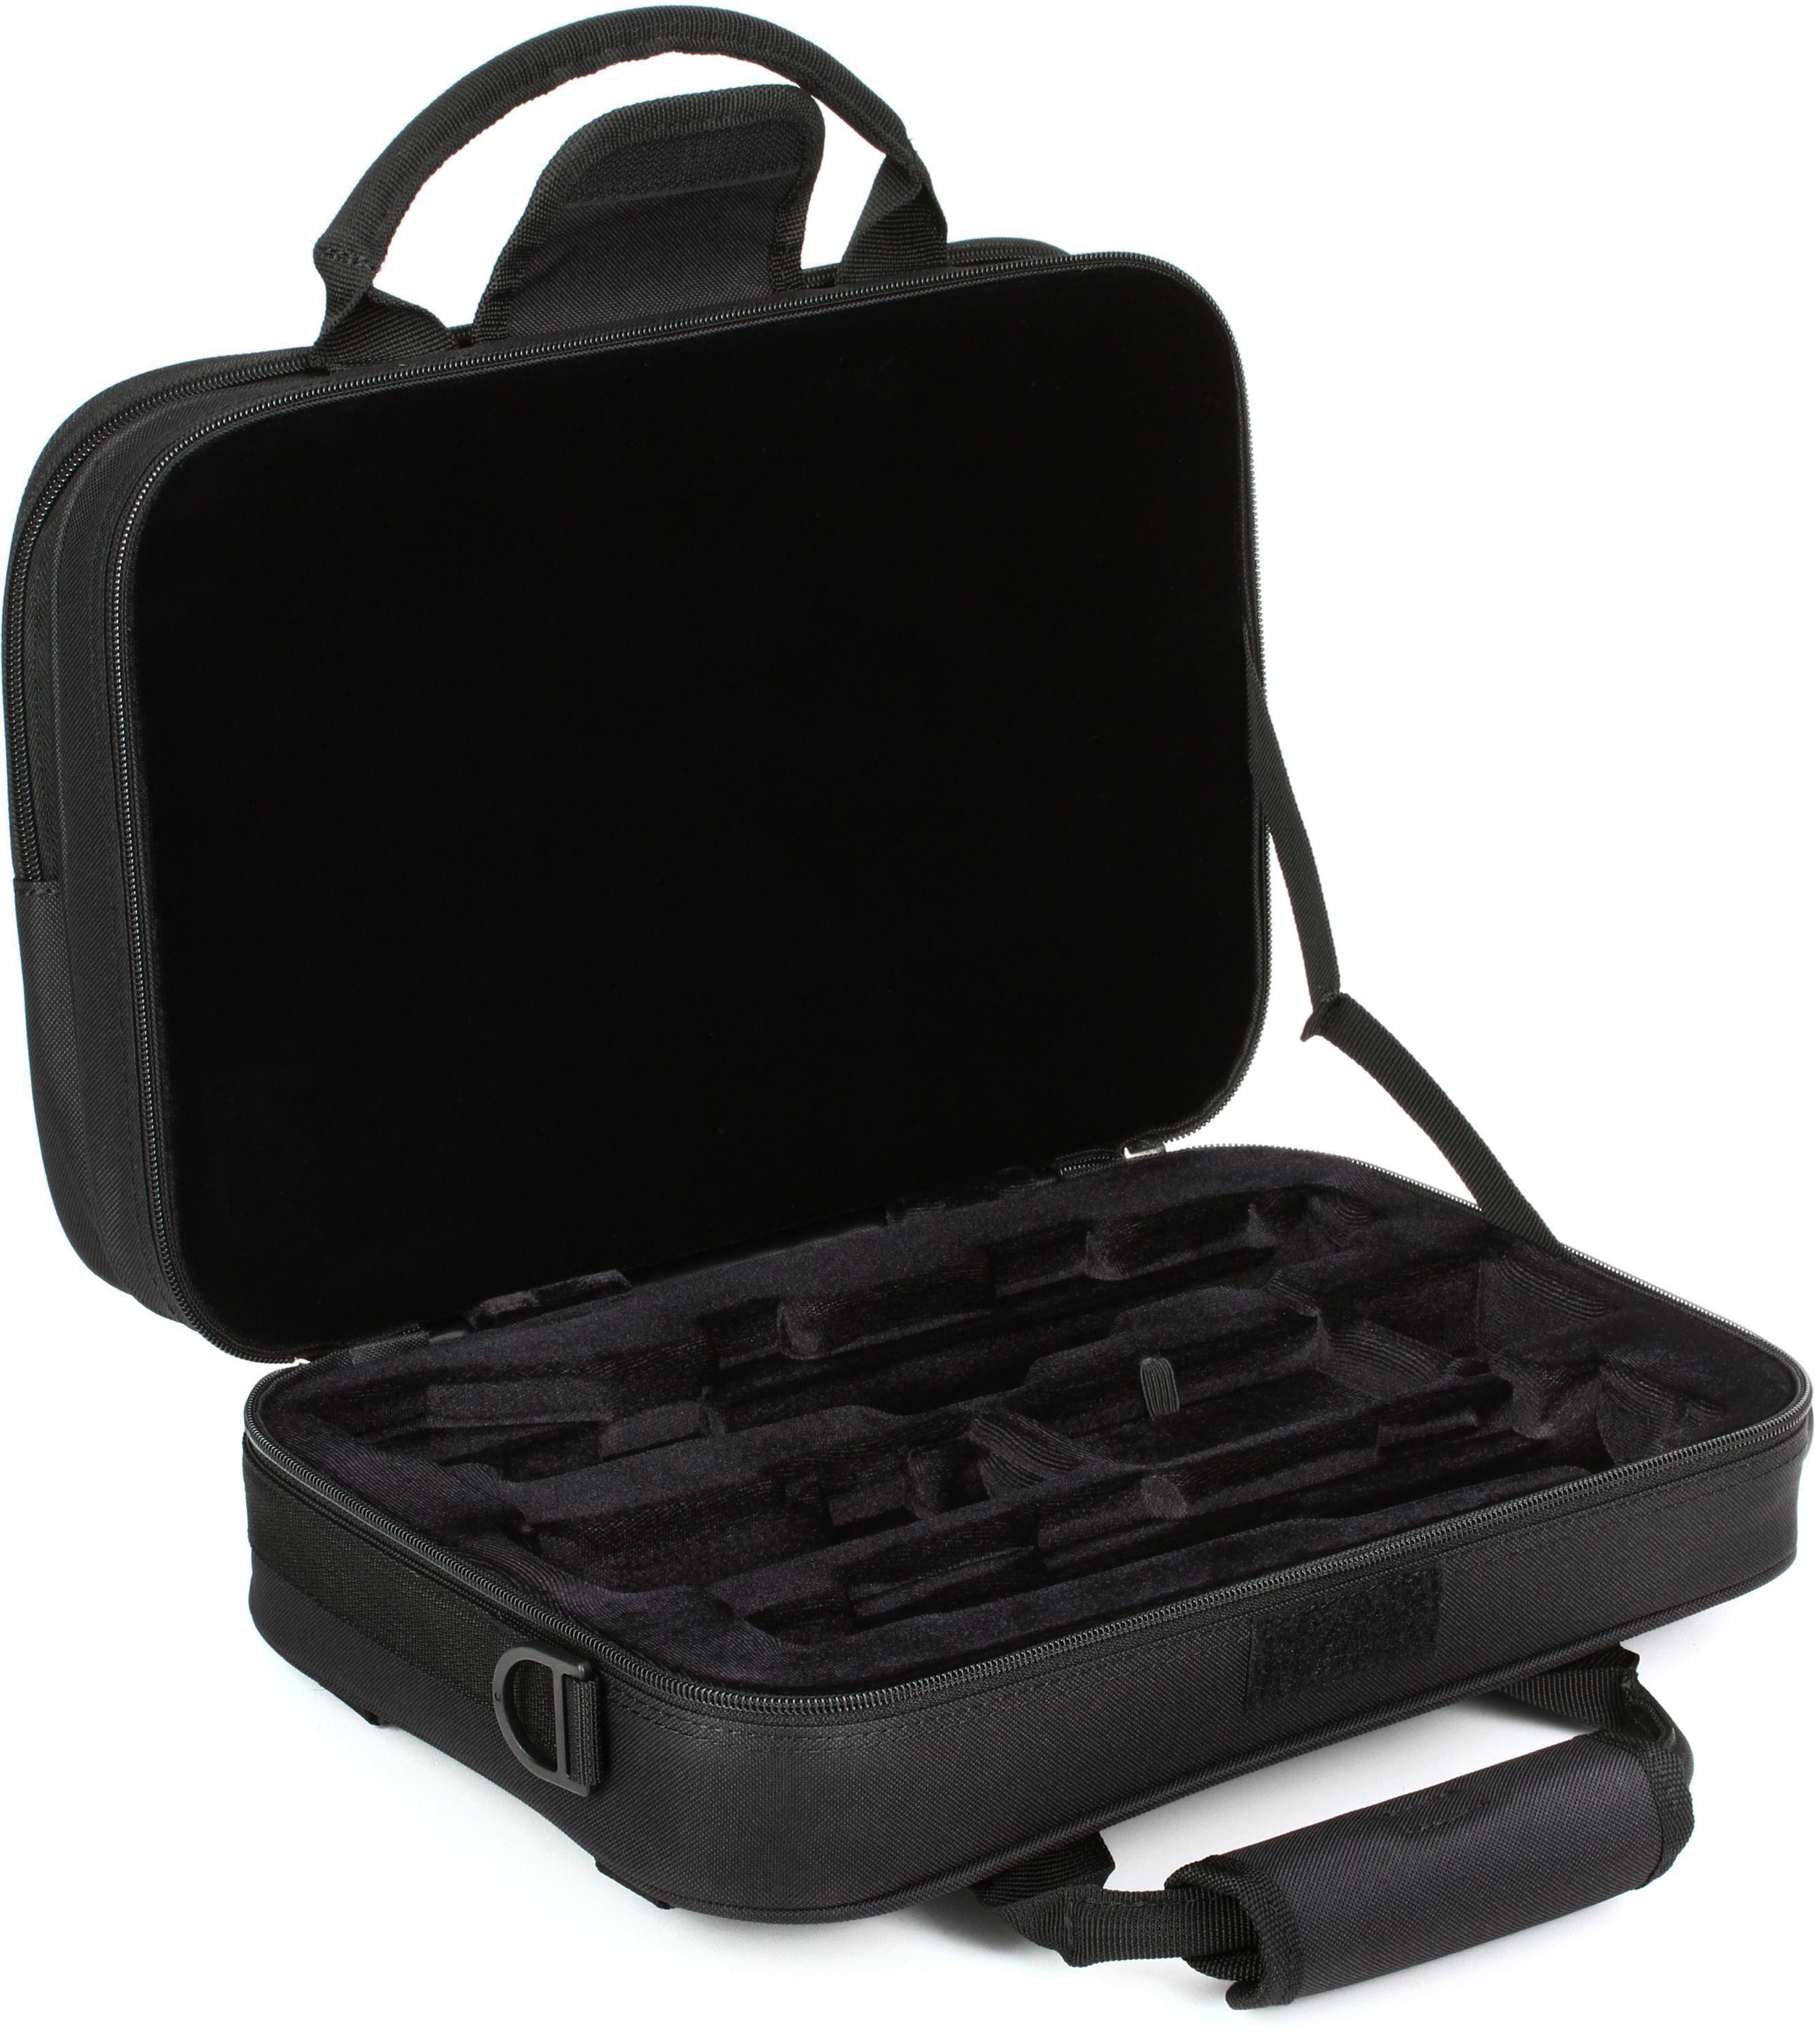 Protec MX315 MAX Oboe Case - Black | Sweetwater